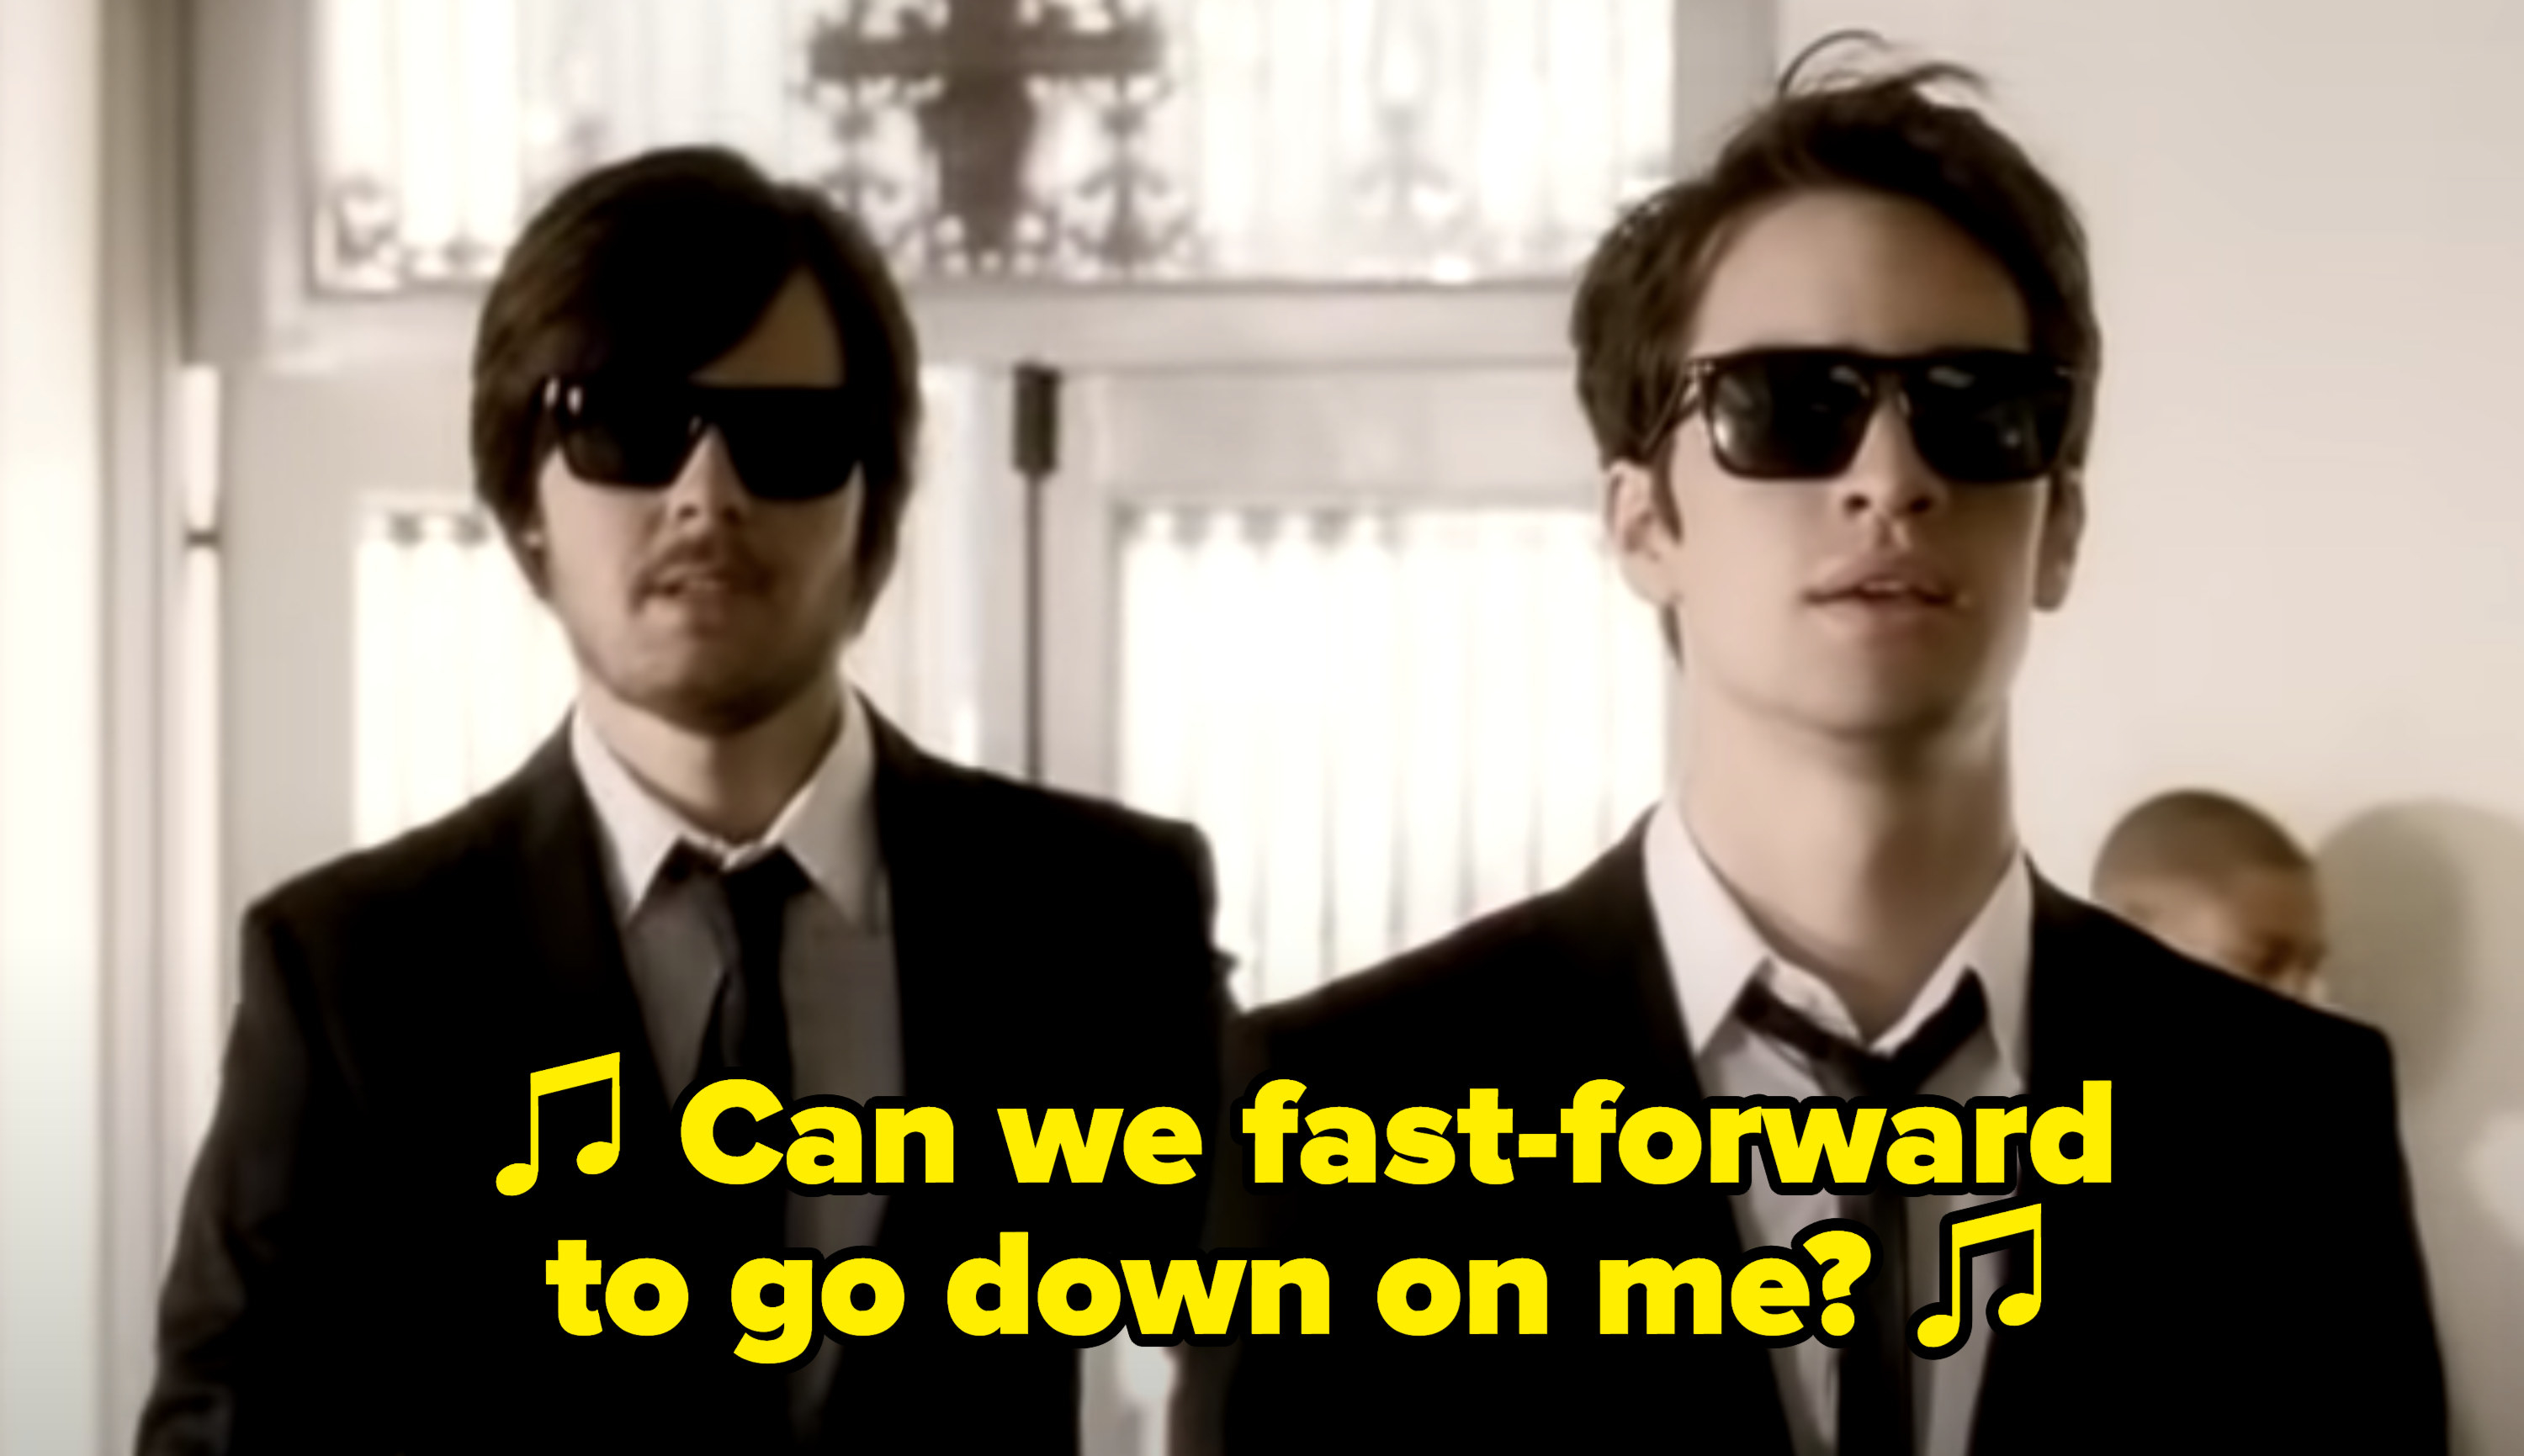 Panic! at the Disco singing: &quot;Can we fast-forward to go down on me?&quot;